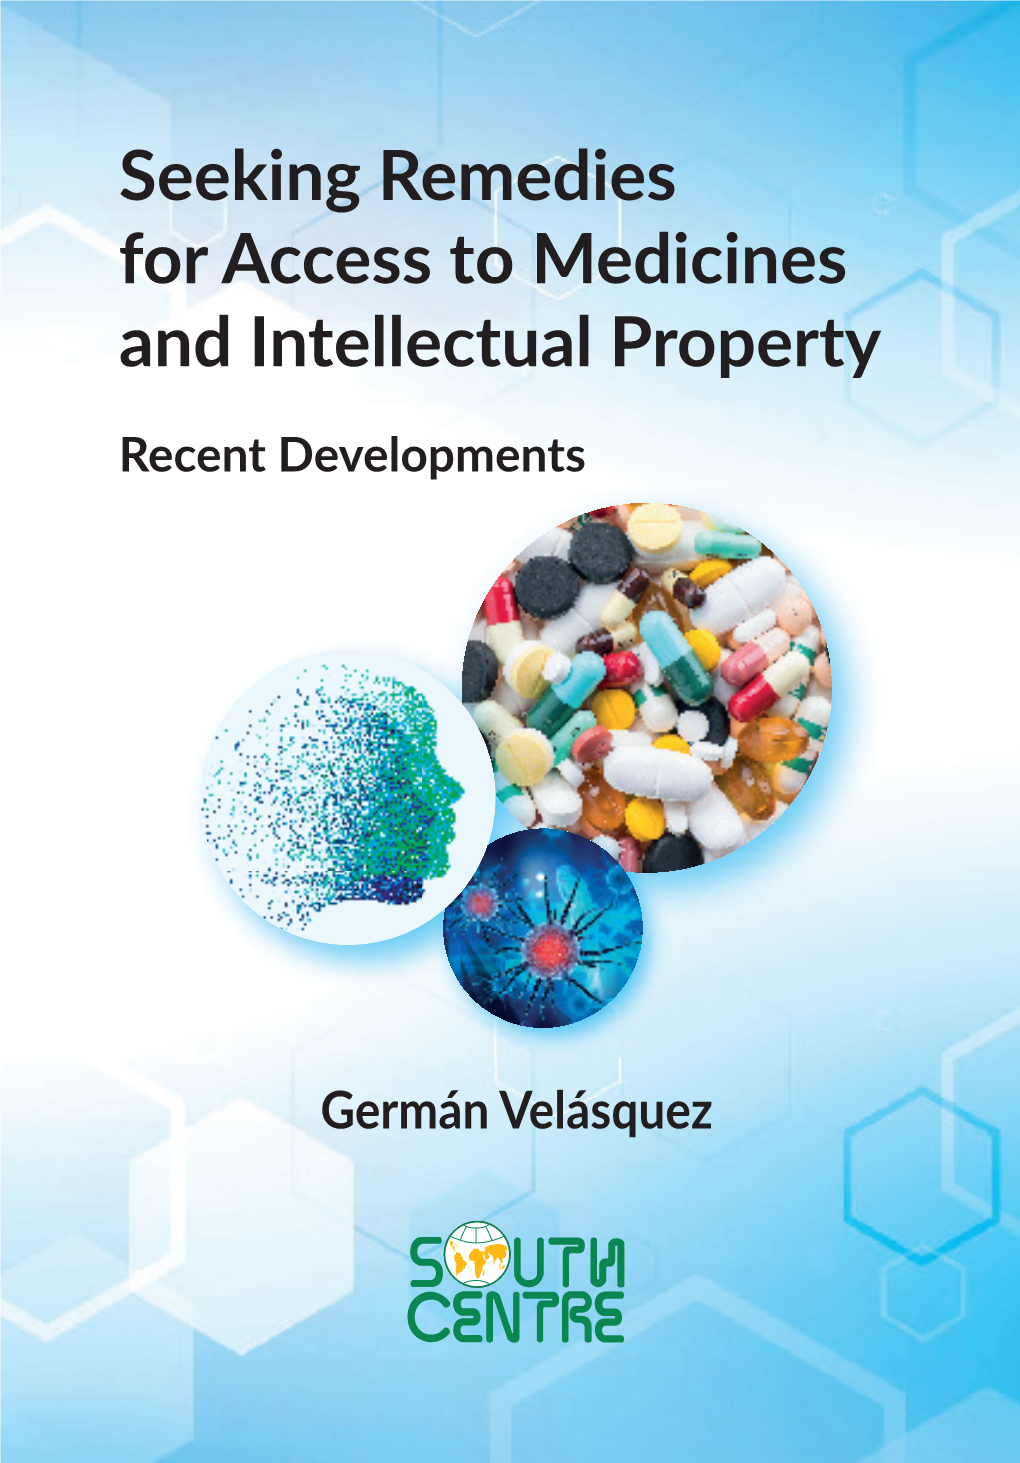 Seeking Remedies for Access to Medicines and Intellectual Property